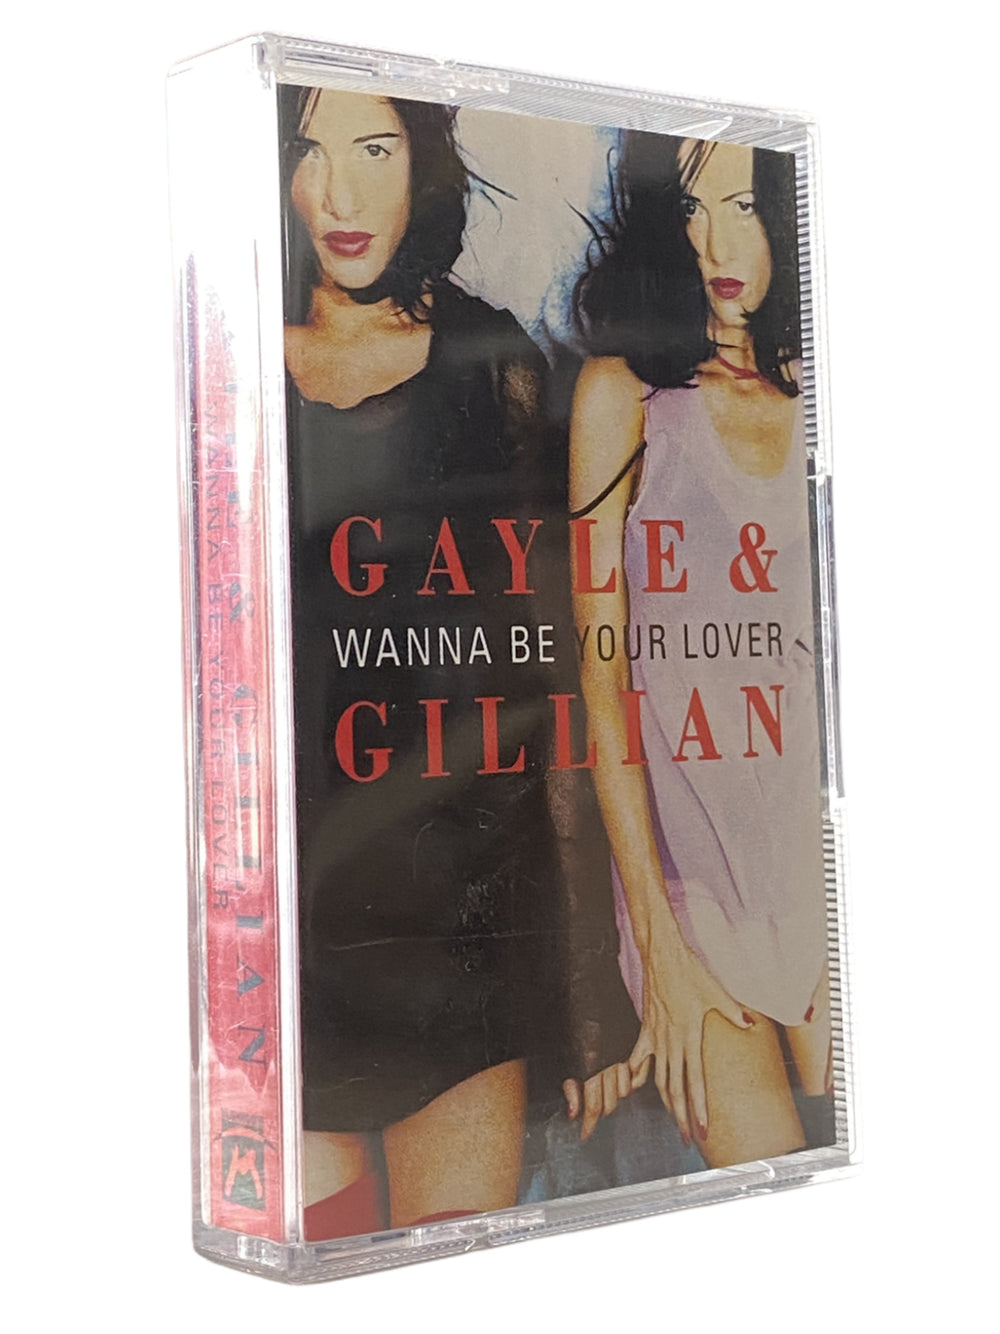 Prince – Gayle & Gillian Wanna Be Your Lover Tape Cassette Single UK 1994 Prince